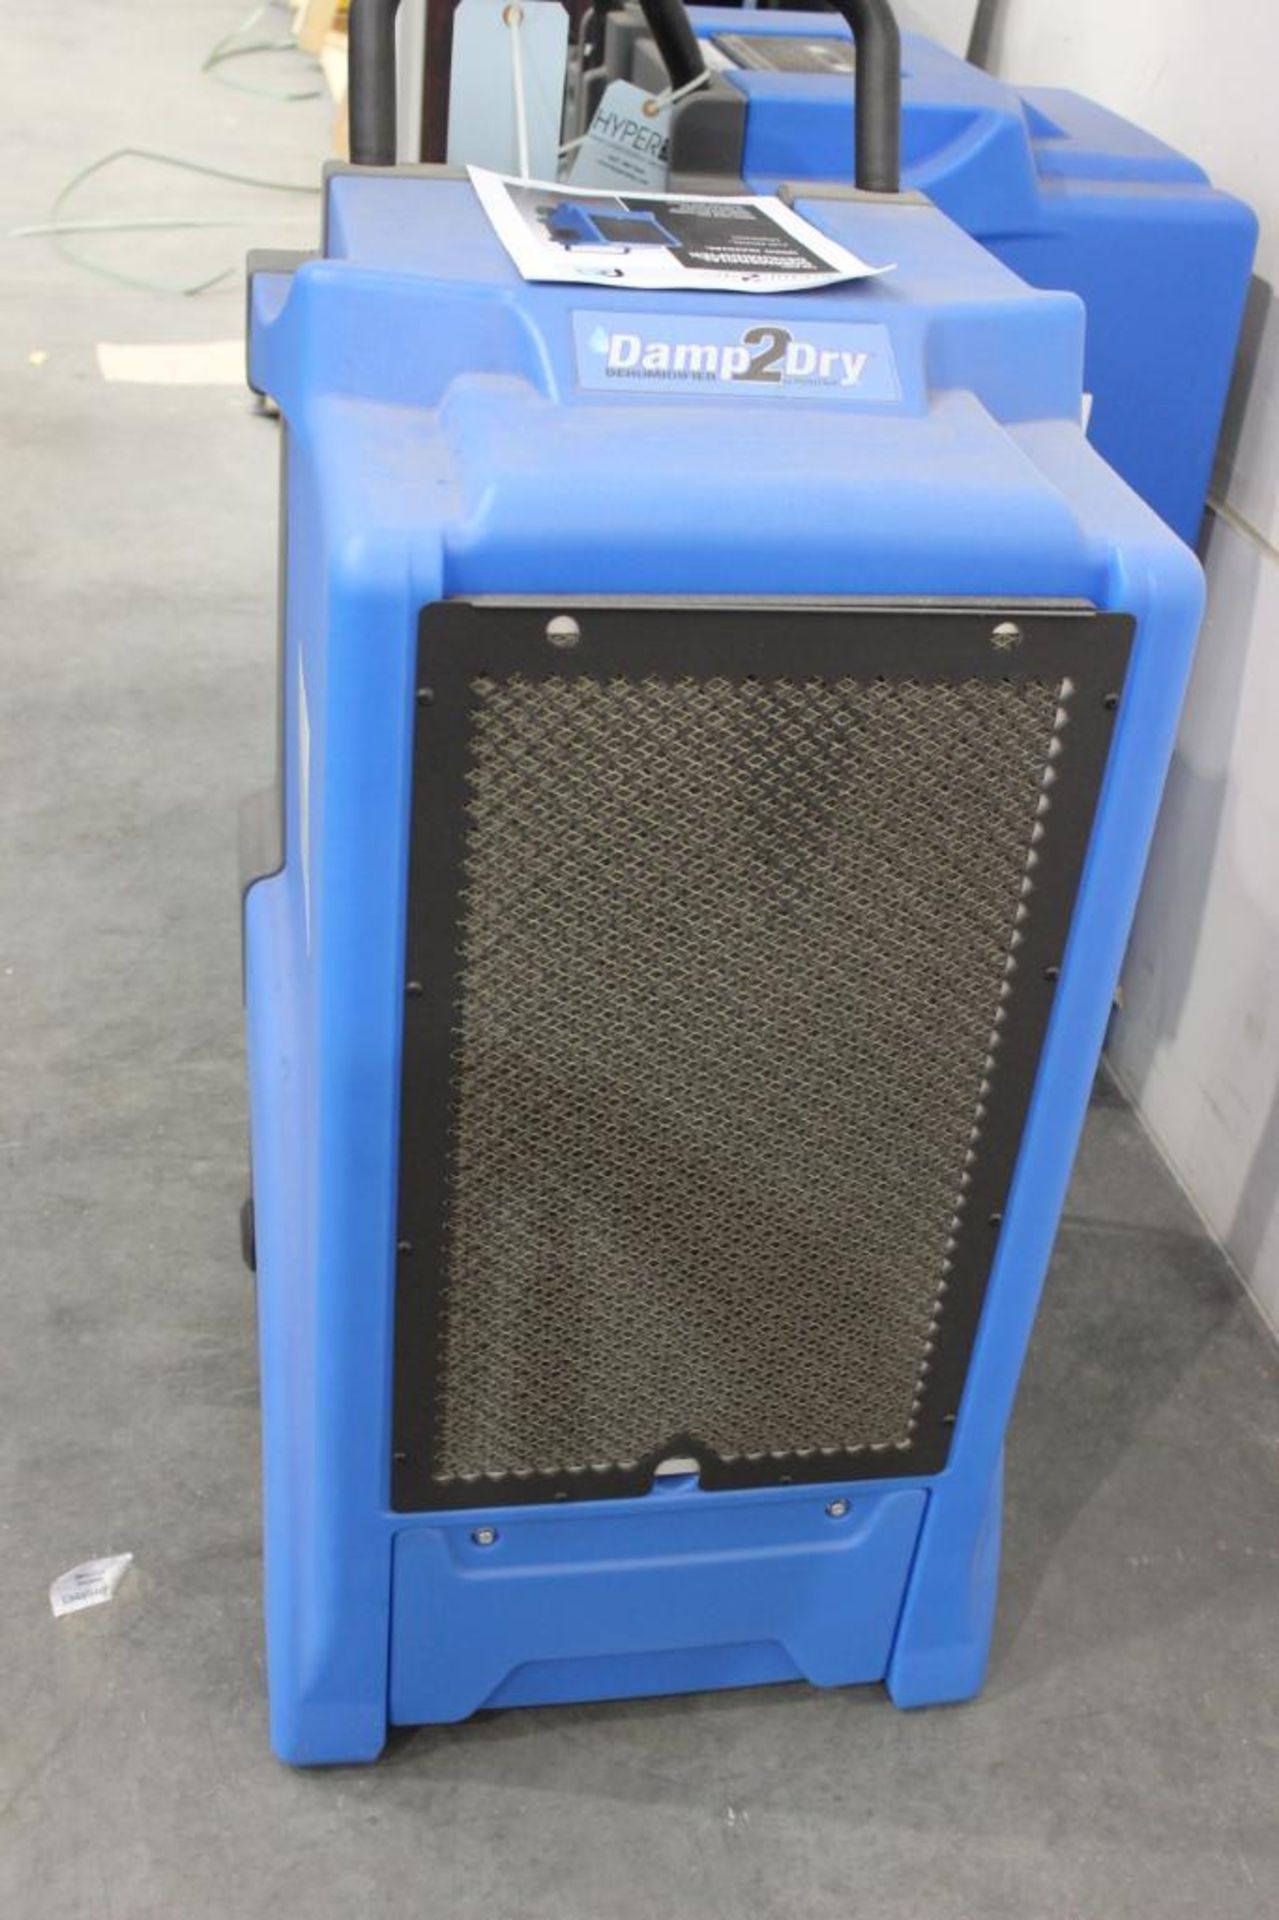 Damp2Dry commercial dehumidifier model 1PACD250 s/n DE184692 - Image 5 of 5